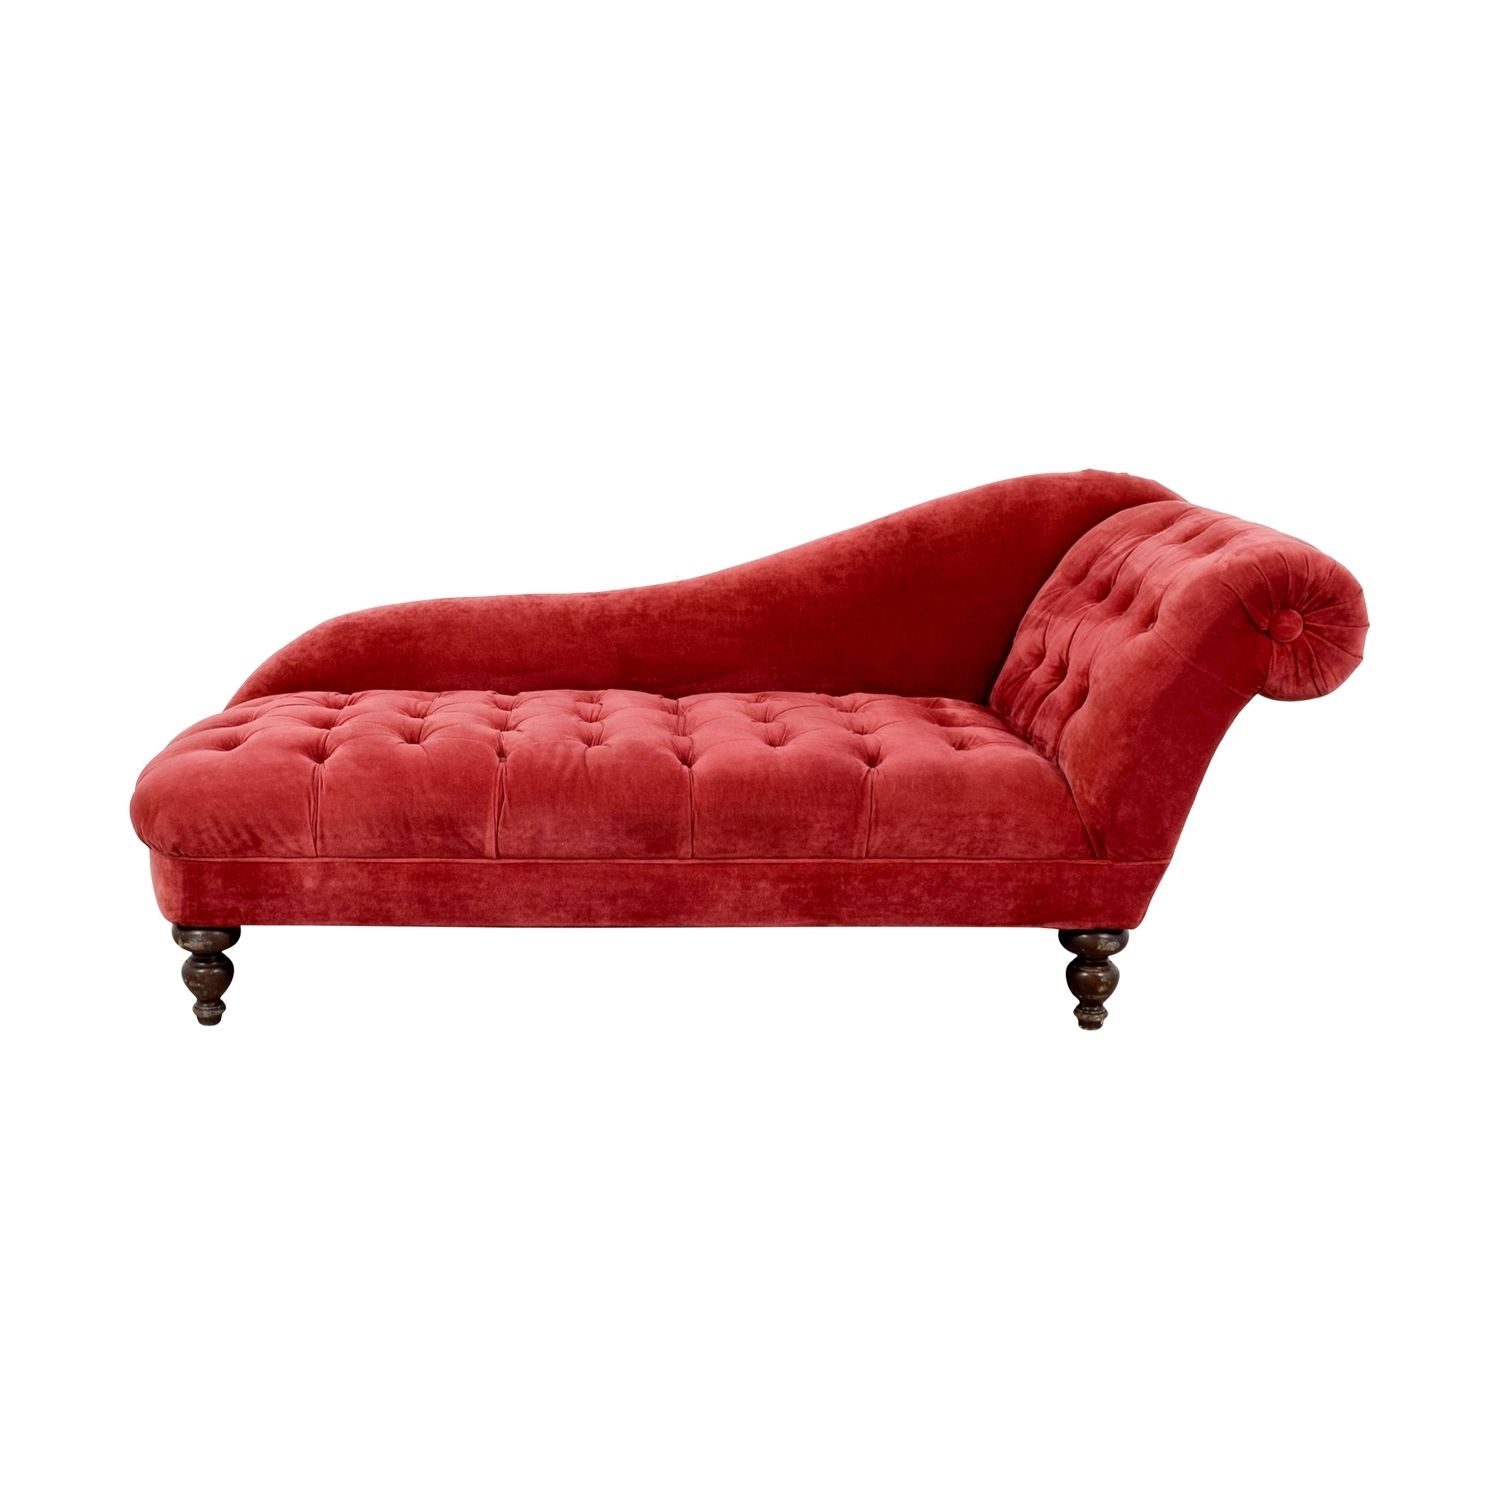 [%71% Off – Domain Home Furnishings Domain Home Furnishings Red With Regard To Most Recent Red Chaise Lounges|red Chaise Lounges For 2017 71% Off – Domain Home Furnishings Domain Home Furnishings Red|best And Newest Red Chaise Lounges With Regard To 71% Off – Domain Home Furnishings Domain Home Furnishings Red|2018 71% Off – Domain Home Furnishings Domain Home Furnishings Red Pertaining To Red Chaise Lounges%] (View 8 of 15)